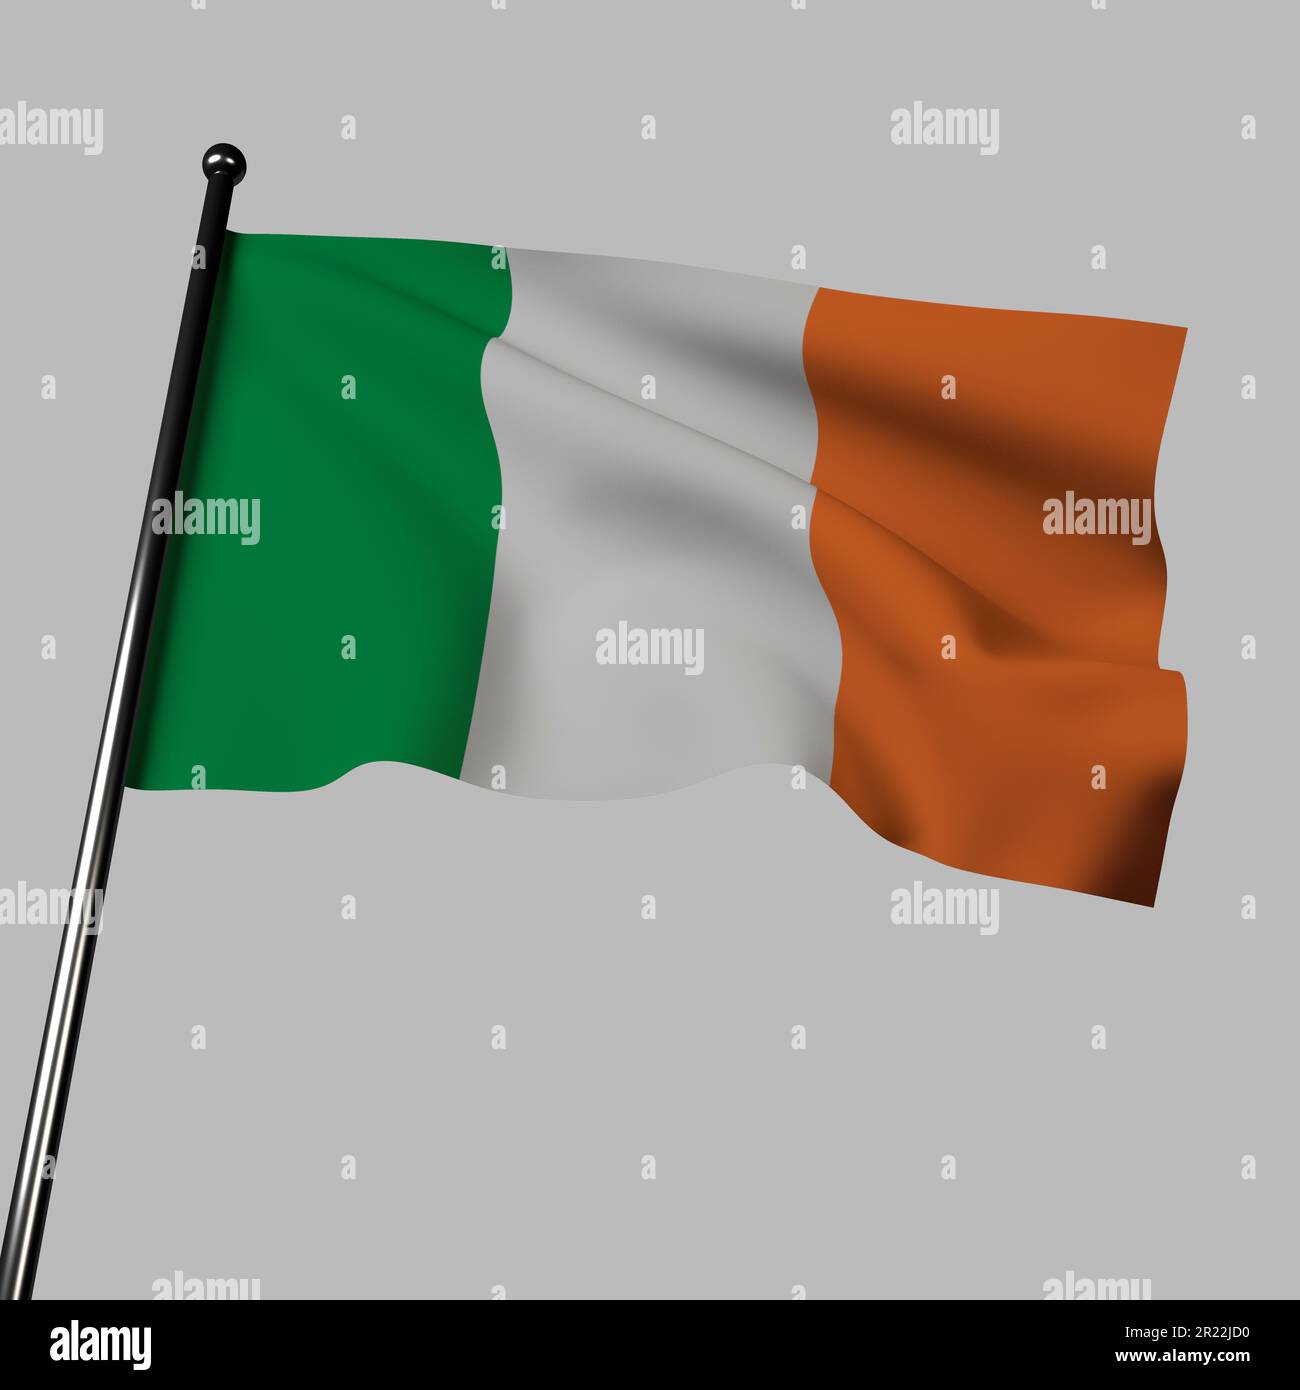 The green, white and orange flag of Ireland is beautifully animated in this 3D illustration as it waves in the wind. The green symbolizes the Catholic Stock Photo